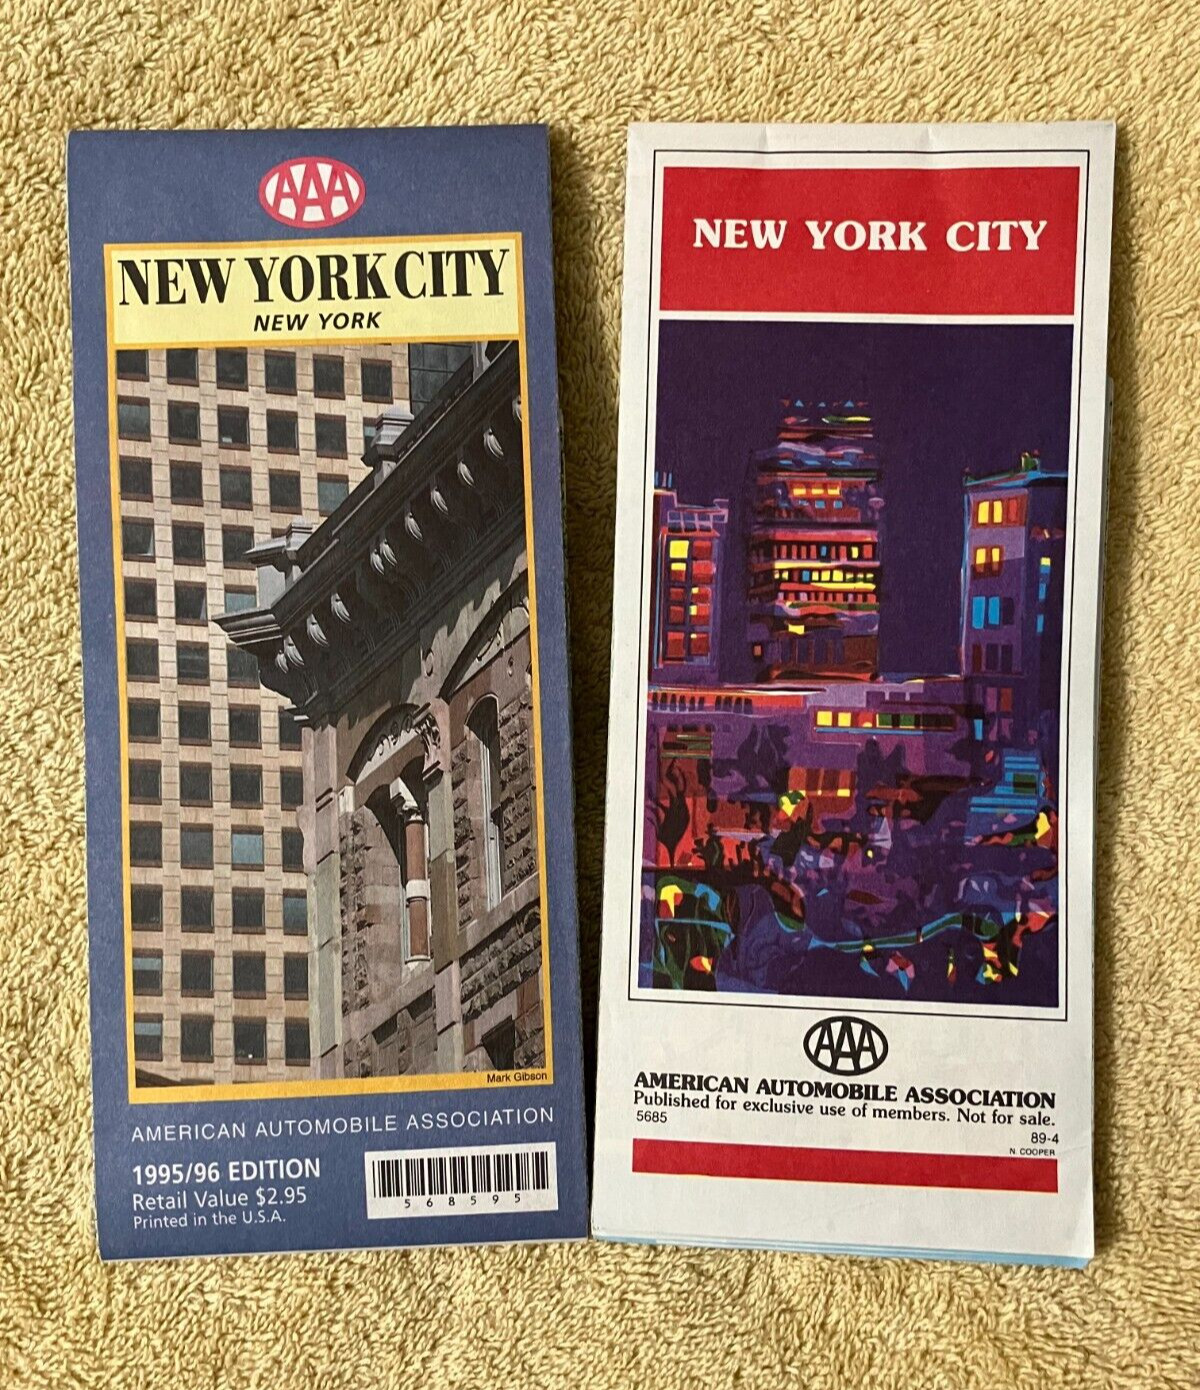 VTG 2 New York City AAA Street Maps 1989 and 1995-96 Editions